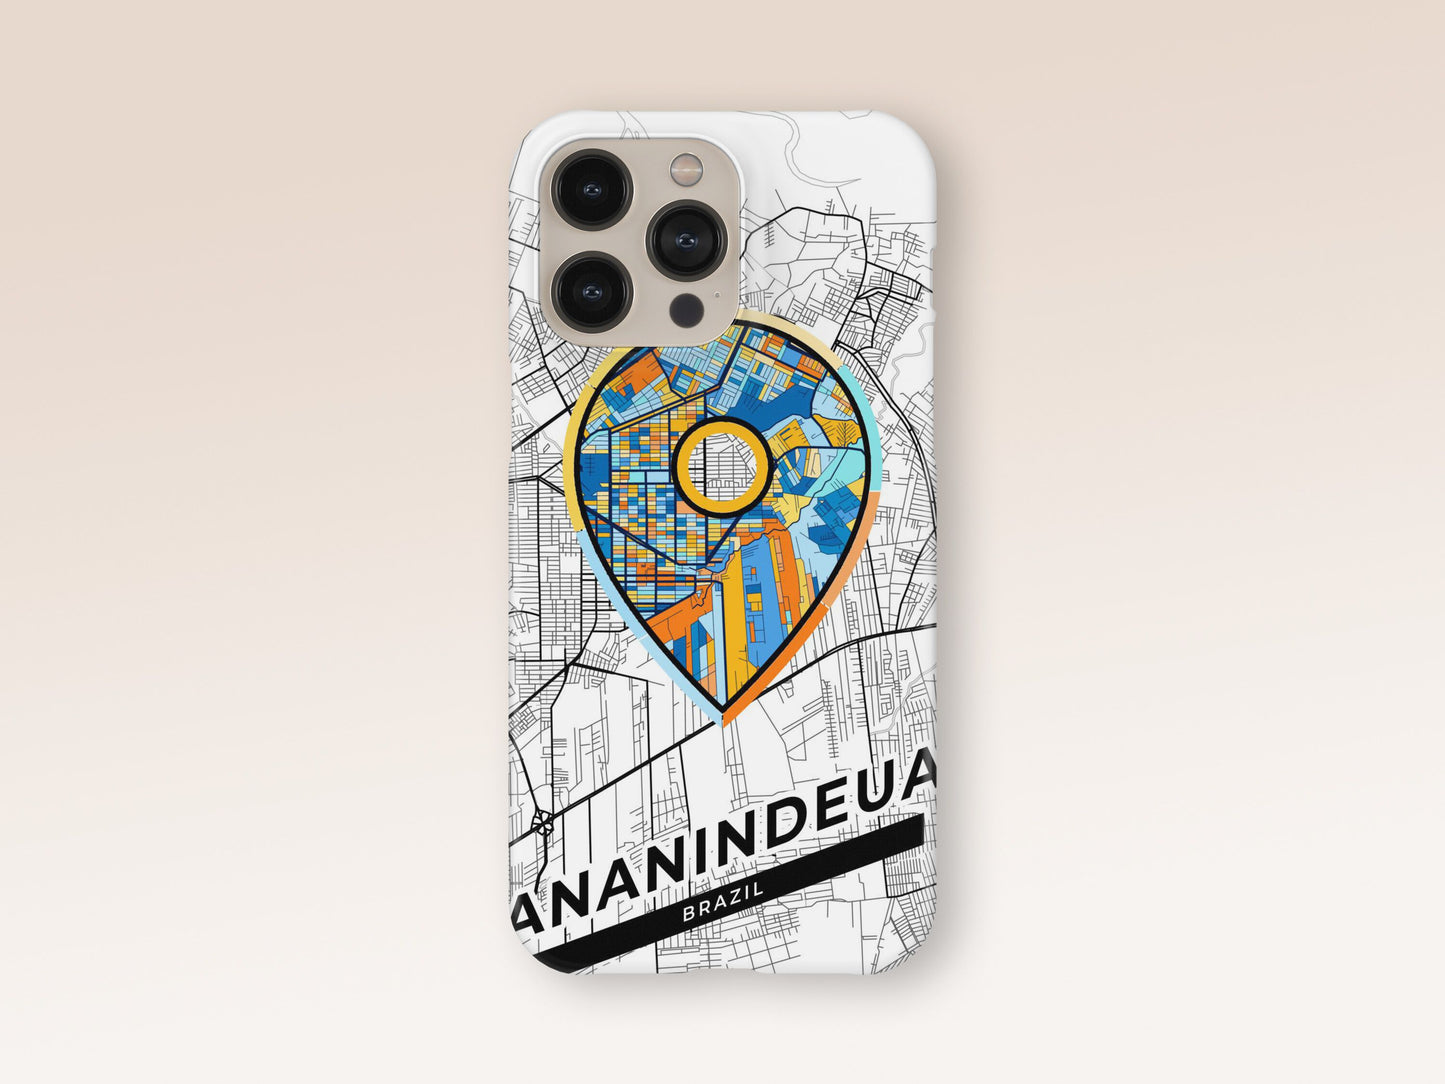 Ananindeua Brazil slim phone case with colorful icon. Birthday, wedding or housewarming gift. Couple match cases. 1